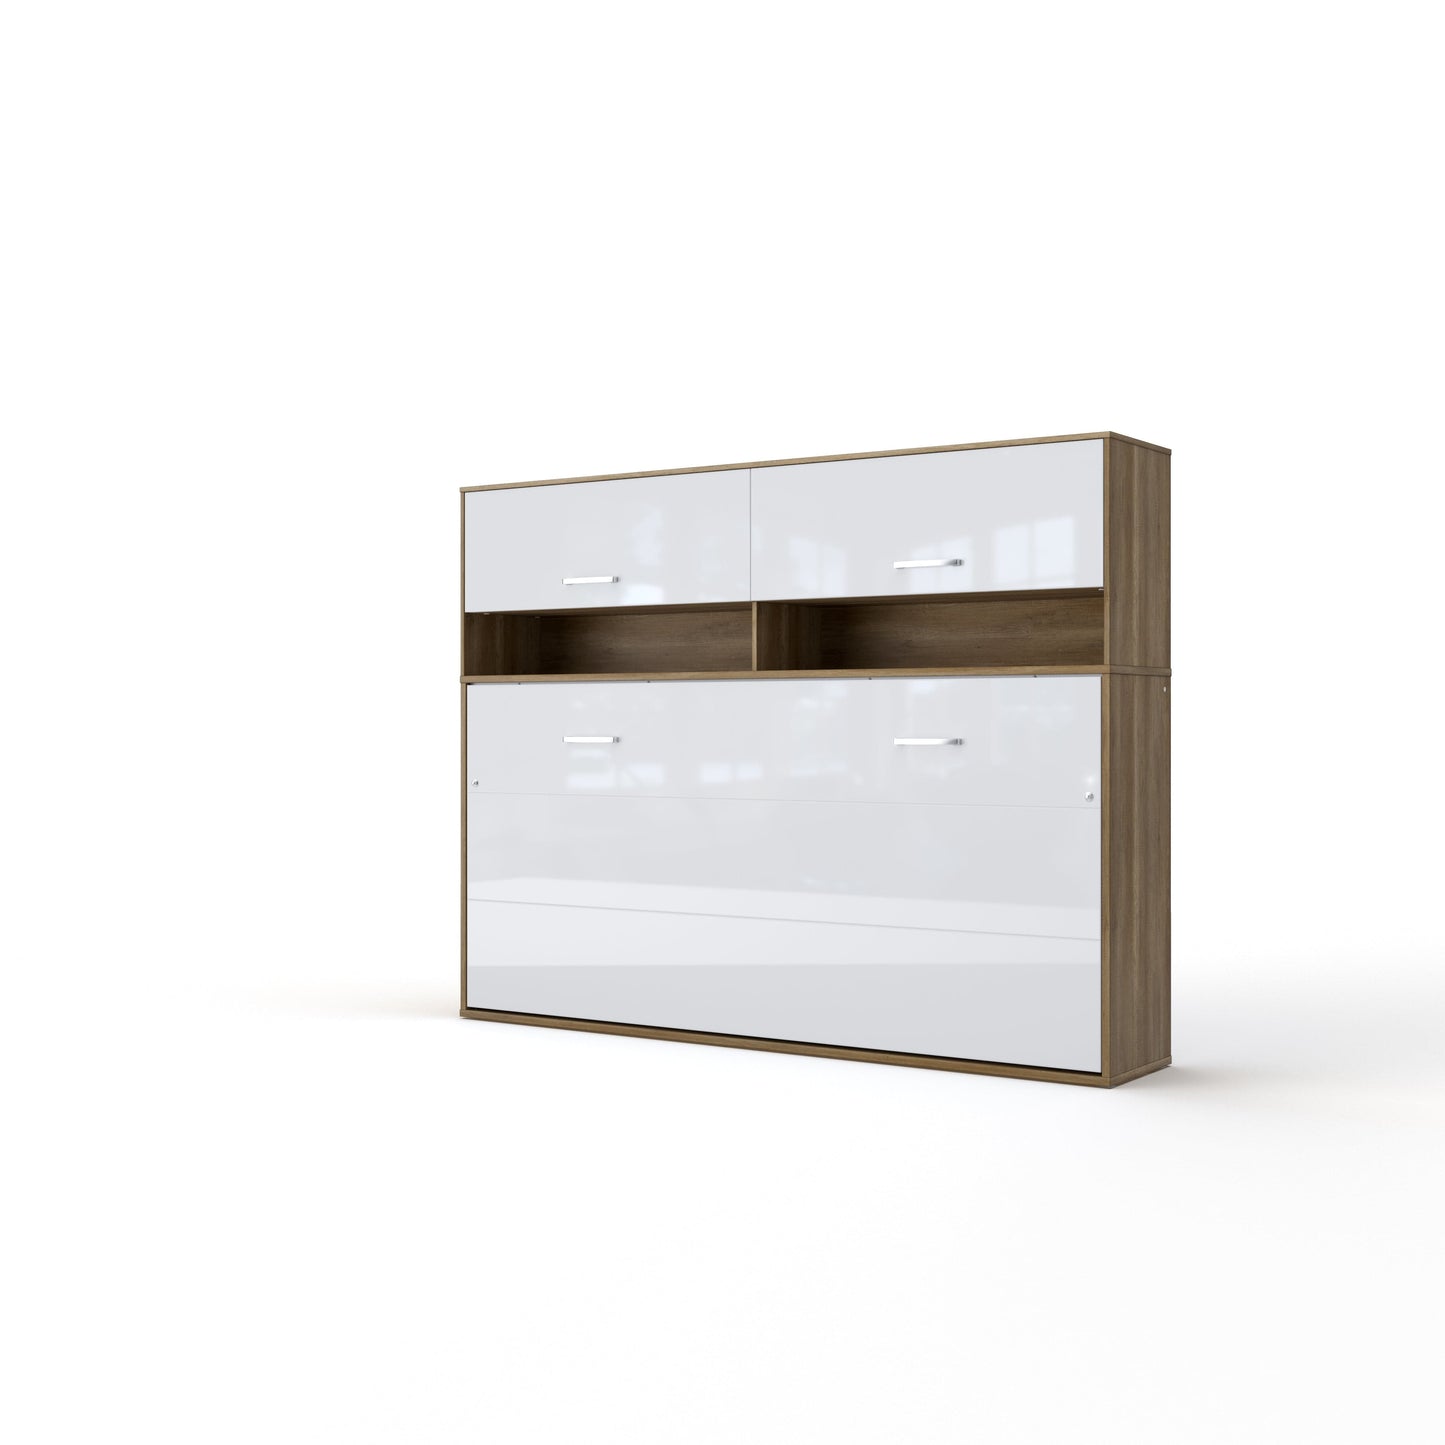 Maxima House Maxima House Horizontal Murphy Bed Invento, European Full XL Size with cabinet, mattress included Oak Country/White IN140H-11OW